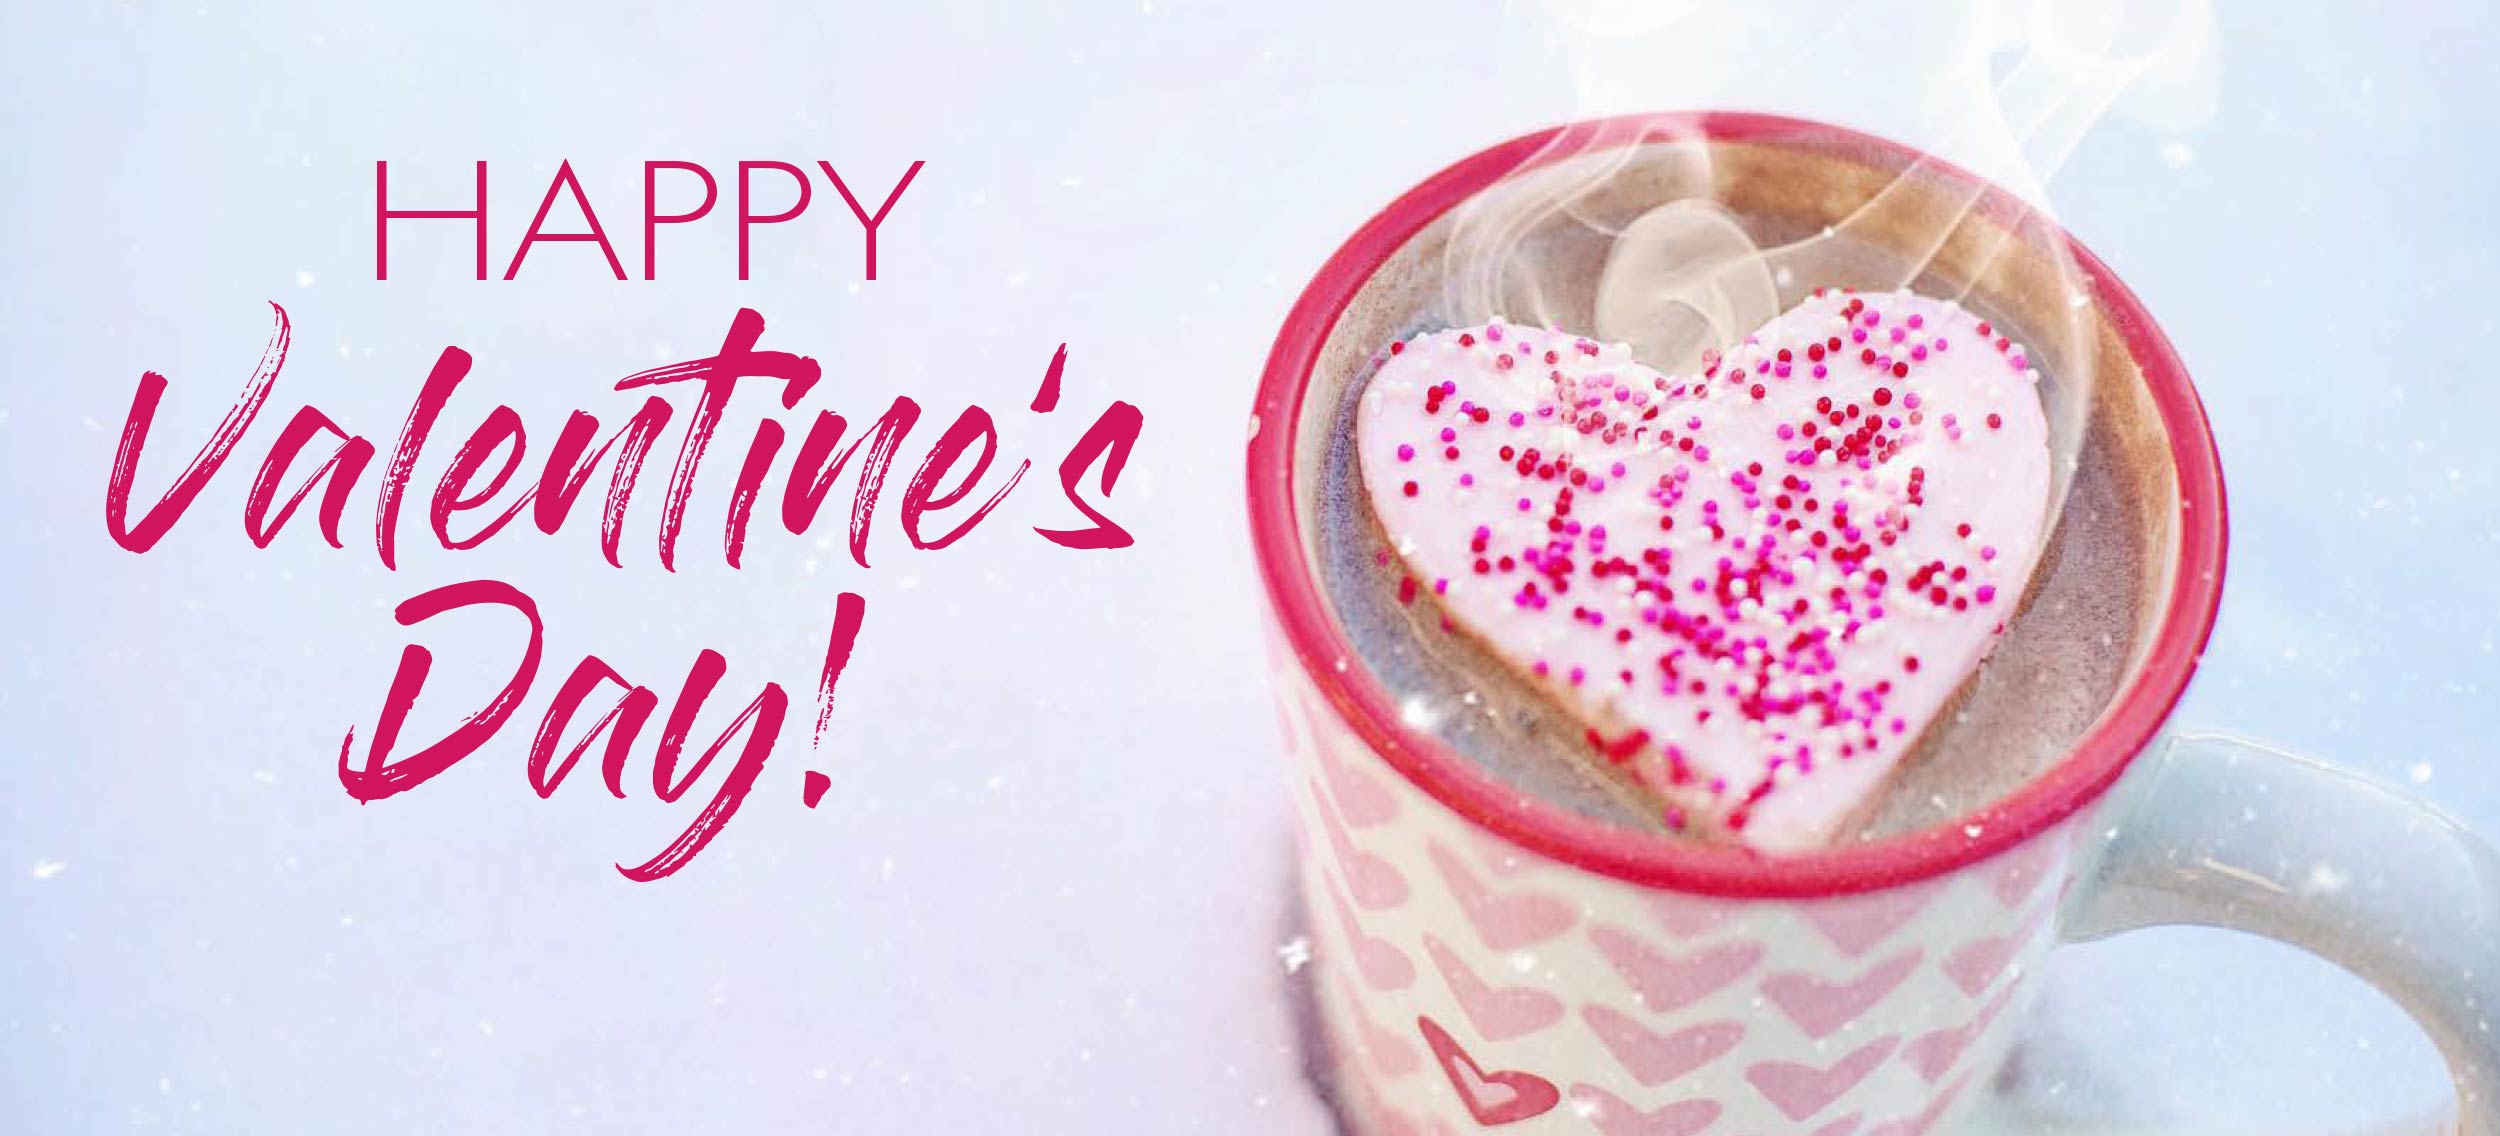 graphic of hot chocolate with heart shaped cookie with pink sprinkles next to words that say happy valentine's day